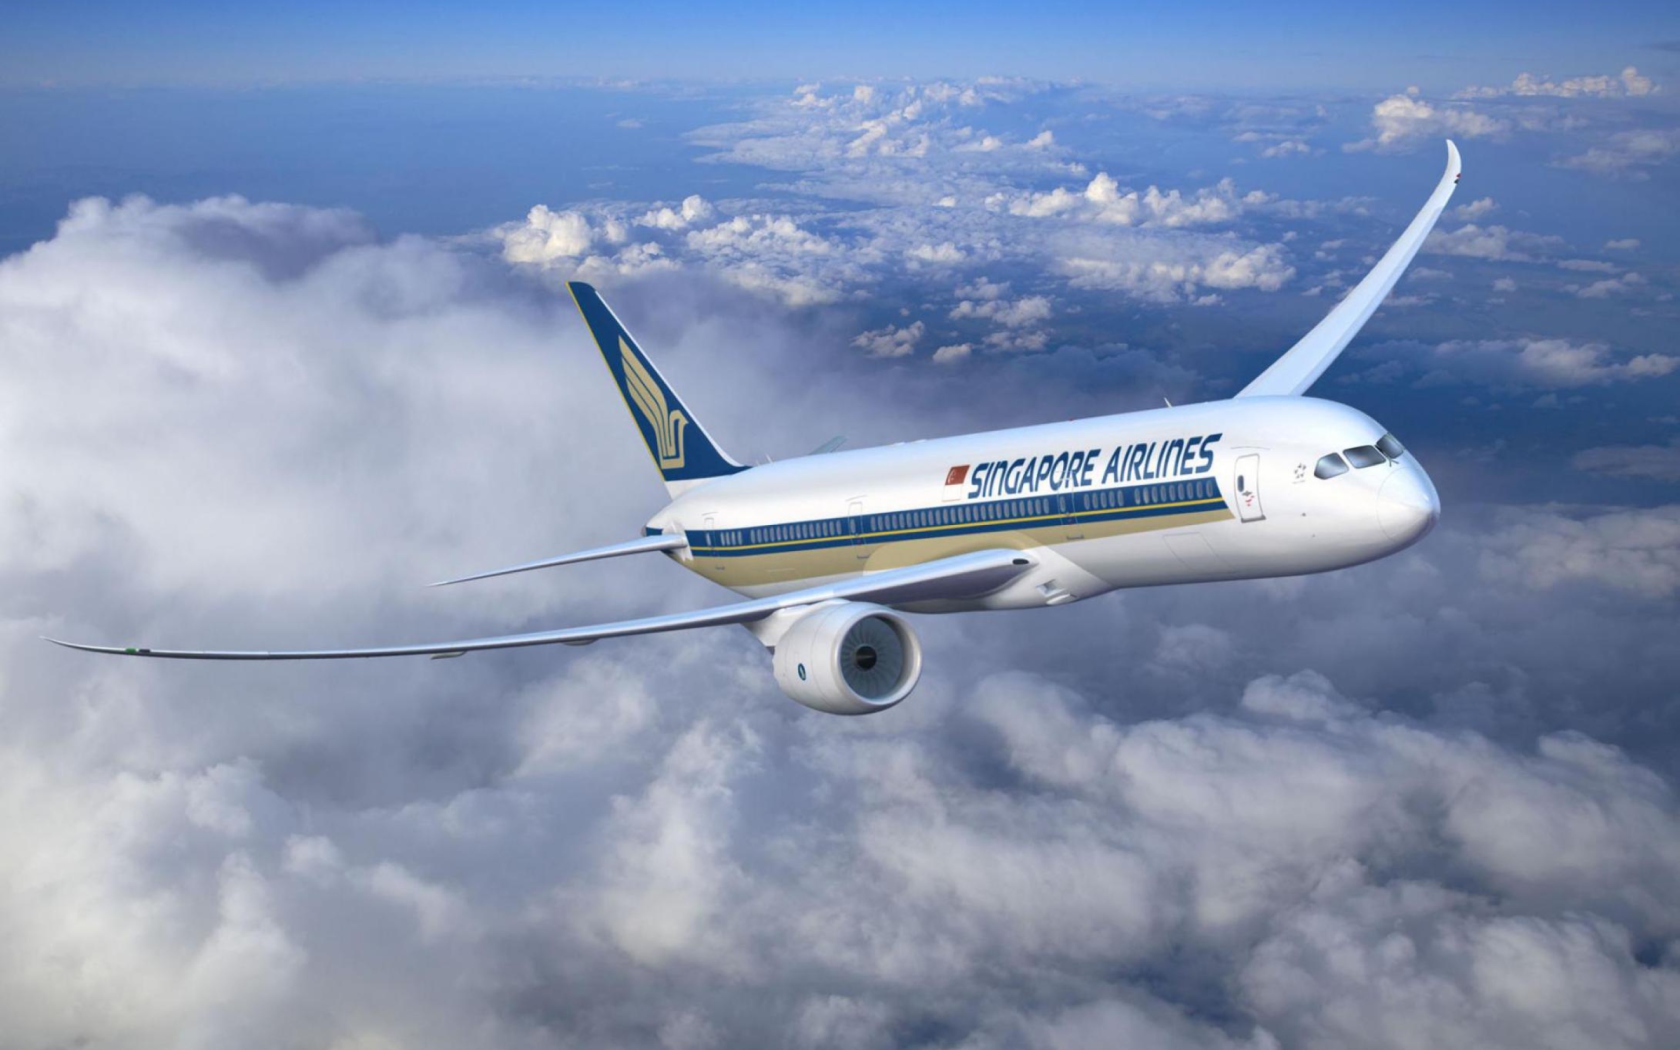 Singapore Airlines wallpaper 1680x1050